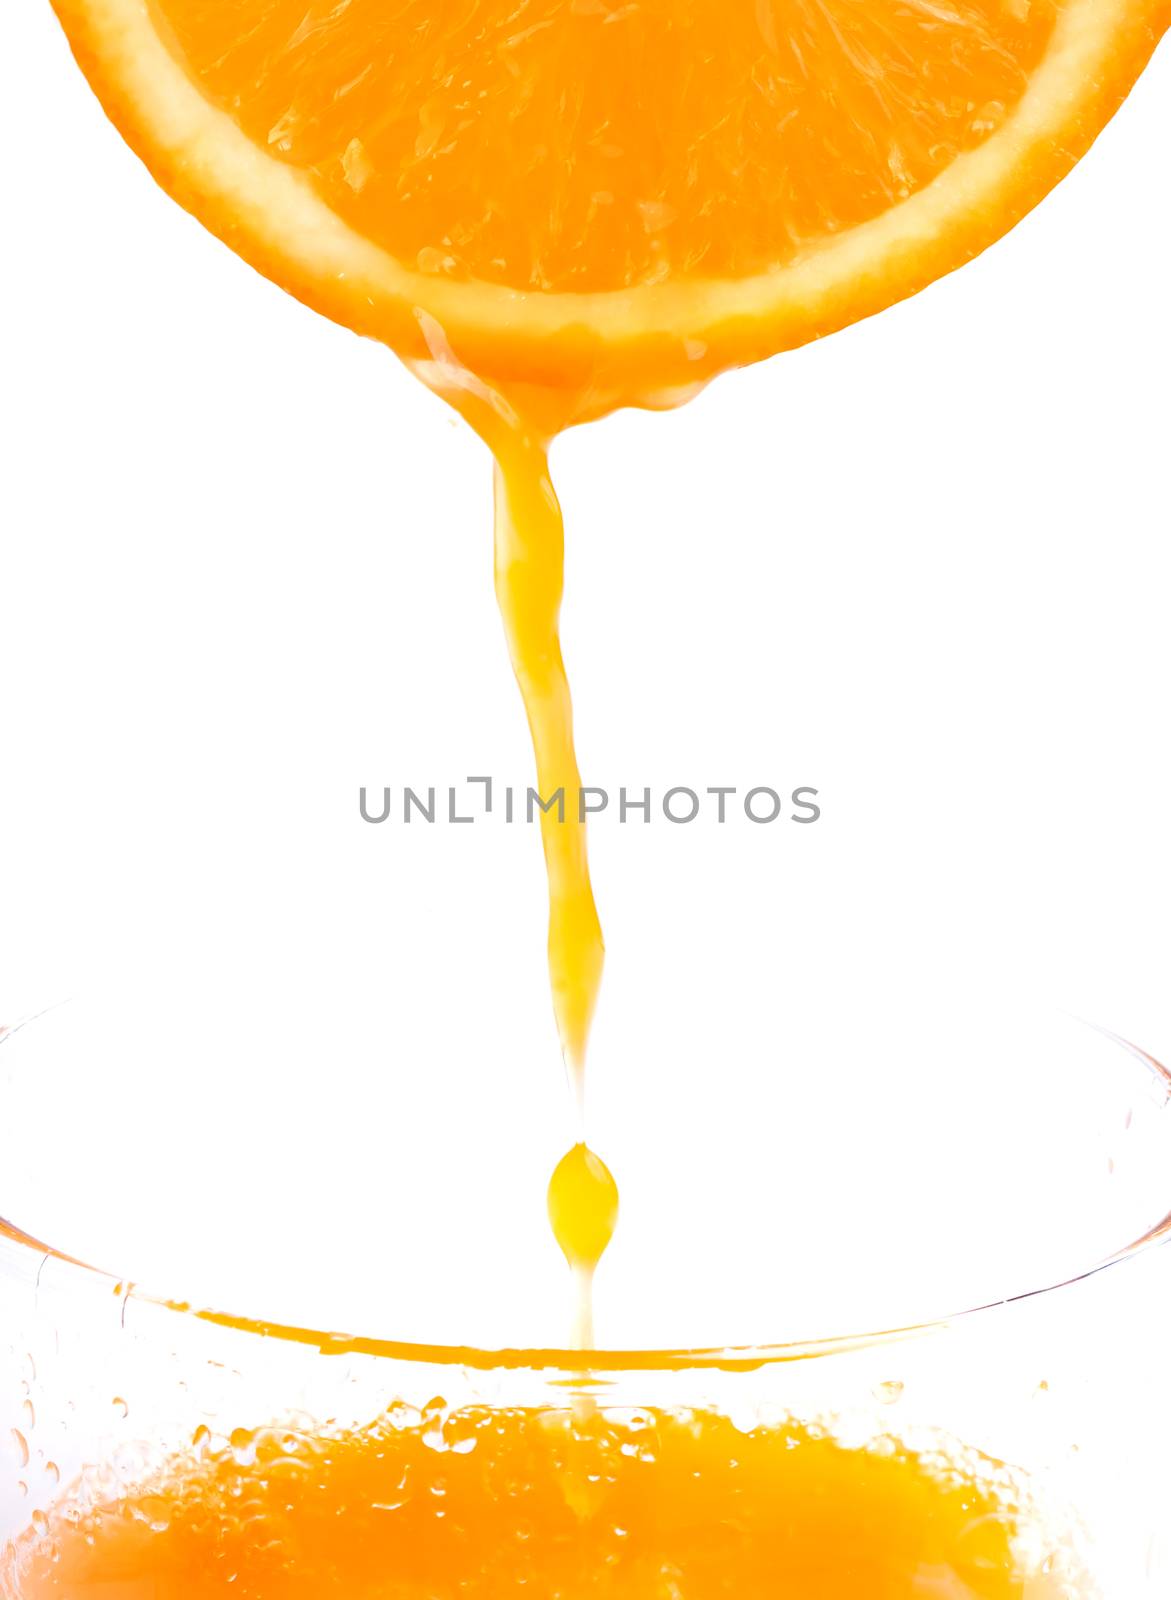 Fresh Juice Squeezed Indicating Healthy Orange Drink And Citrus Fruit